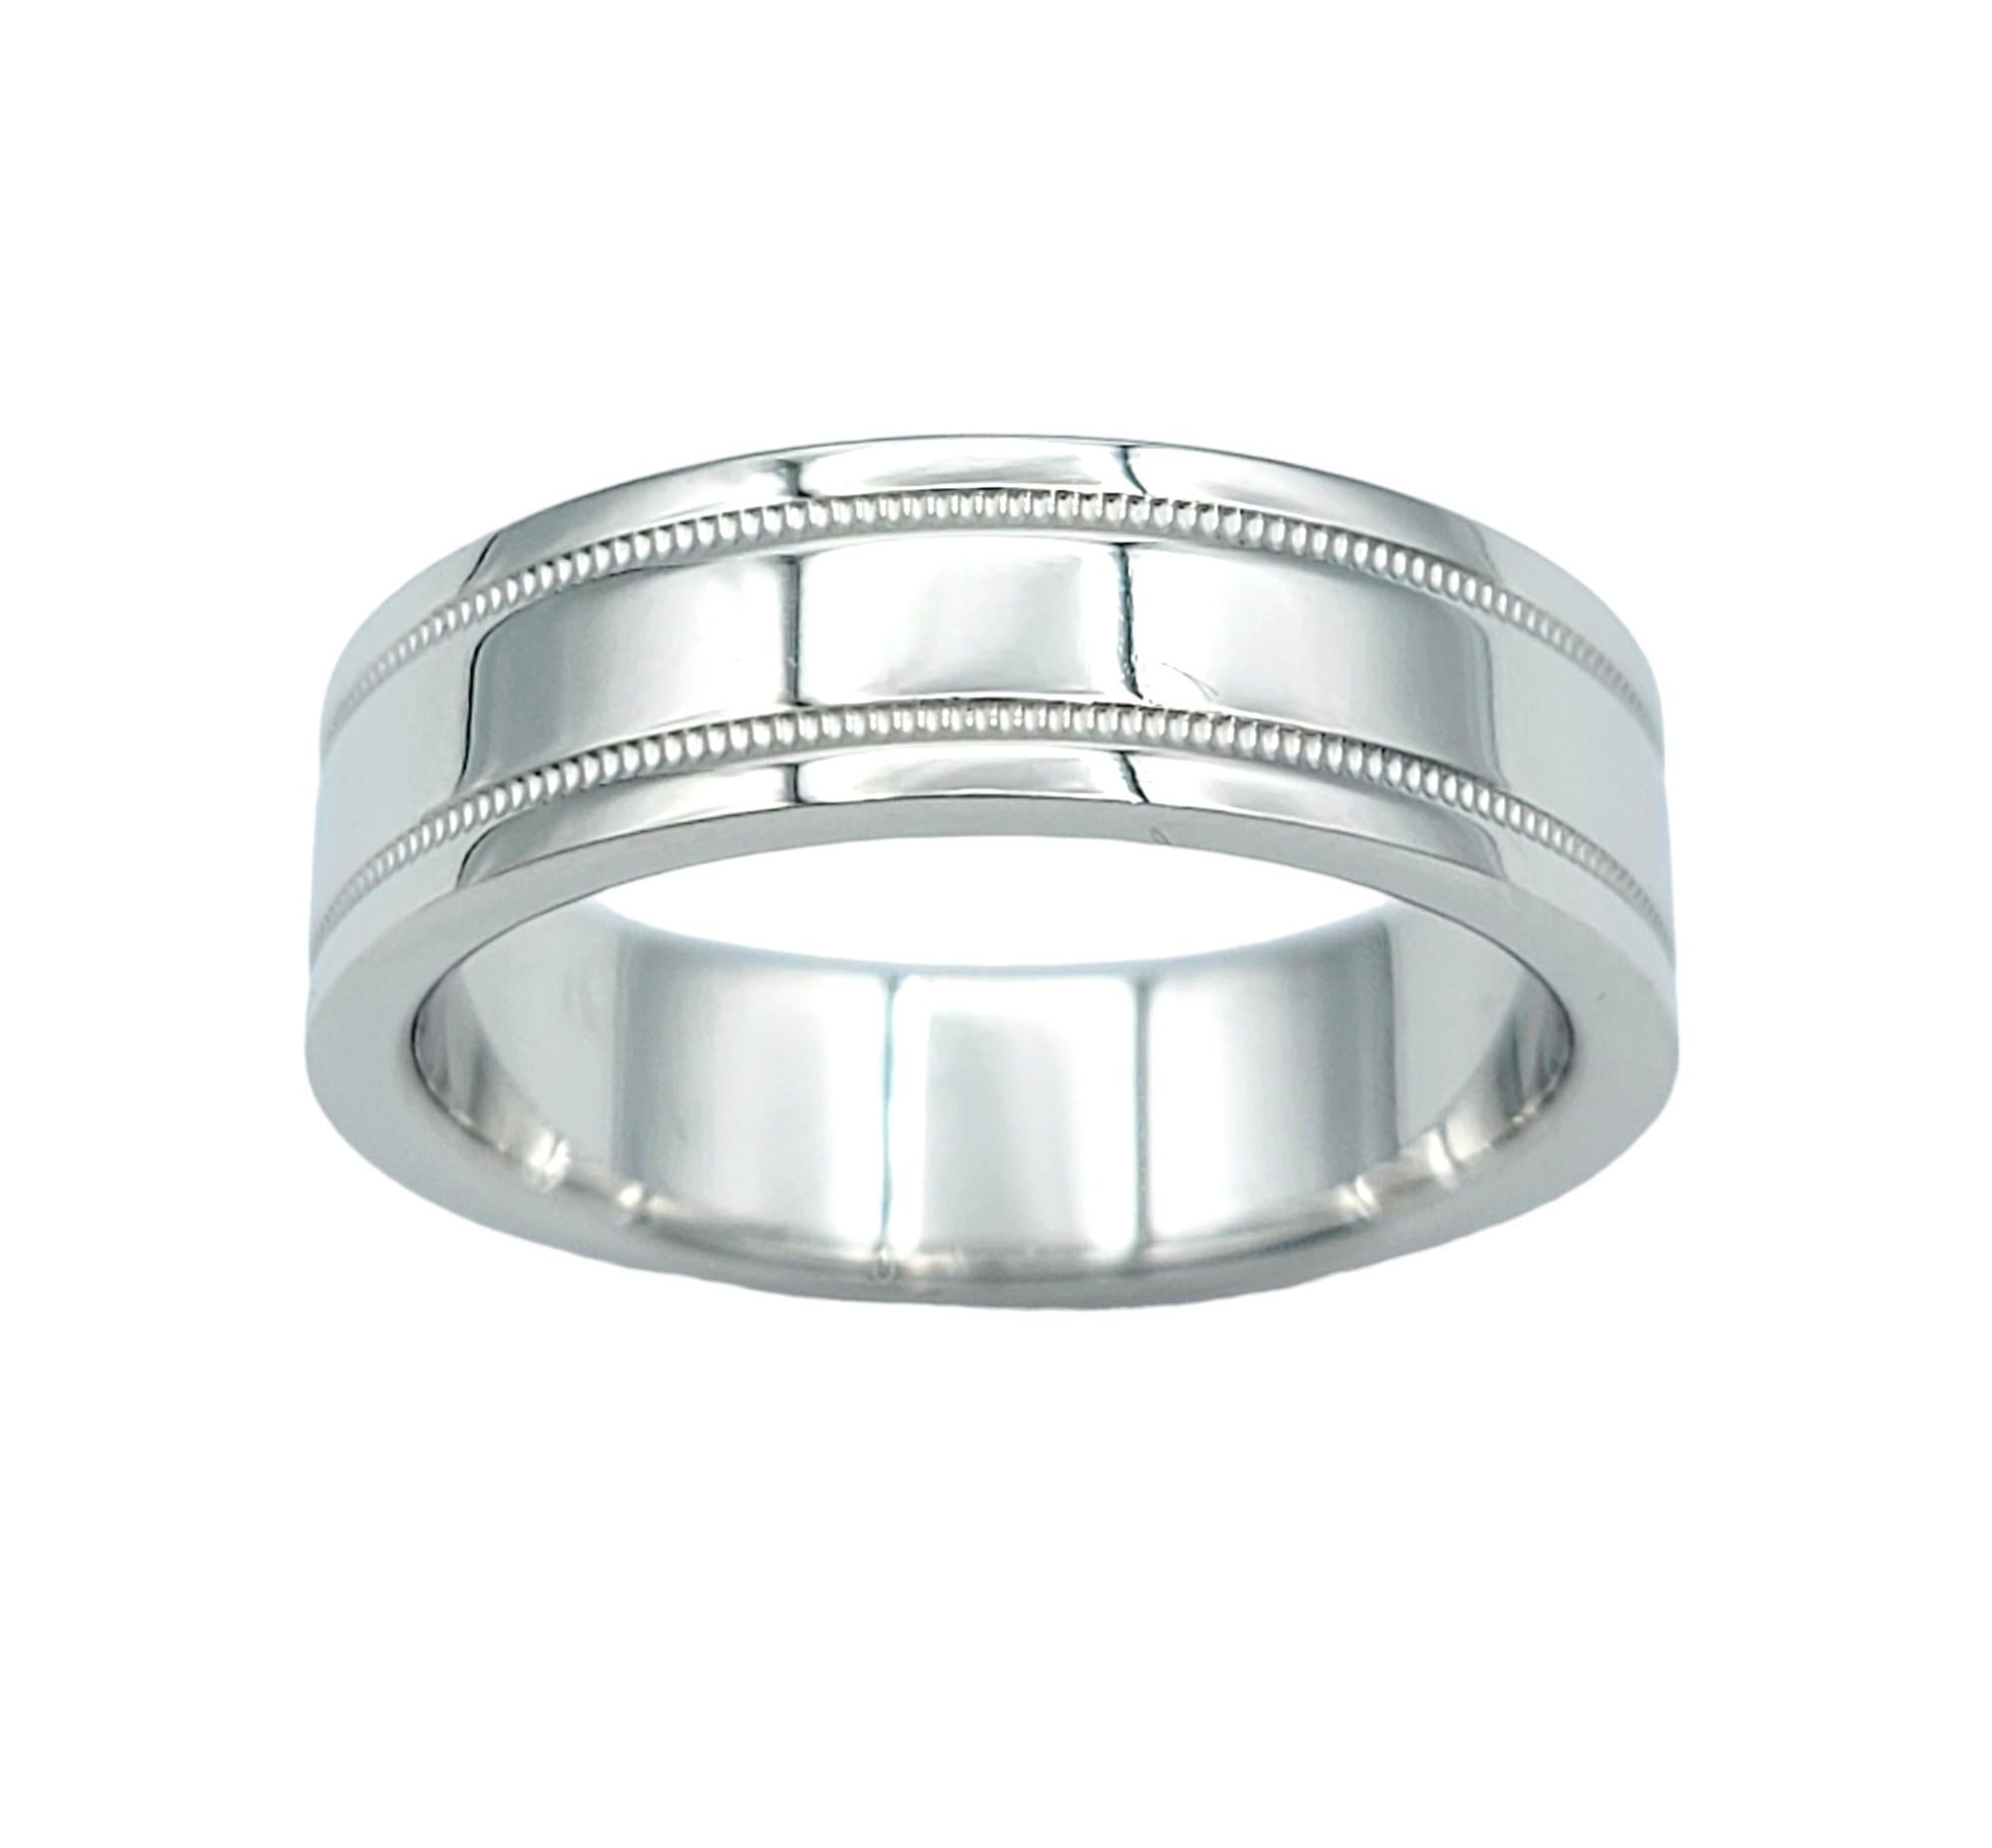 Ring size: 8

This classic band ring from the Tiffany & Co. 'Together' Collection is the quintessential wedding ring. Founded in 1837 in New York City, Tiffany & Co. is one of the world's most storied luxury design houses recognized globally for its